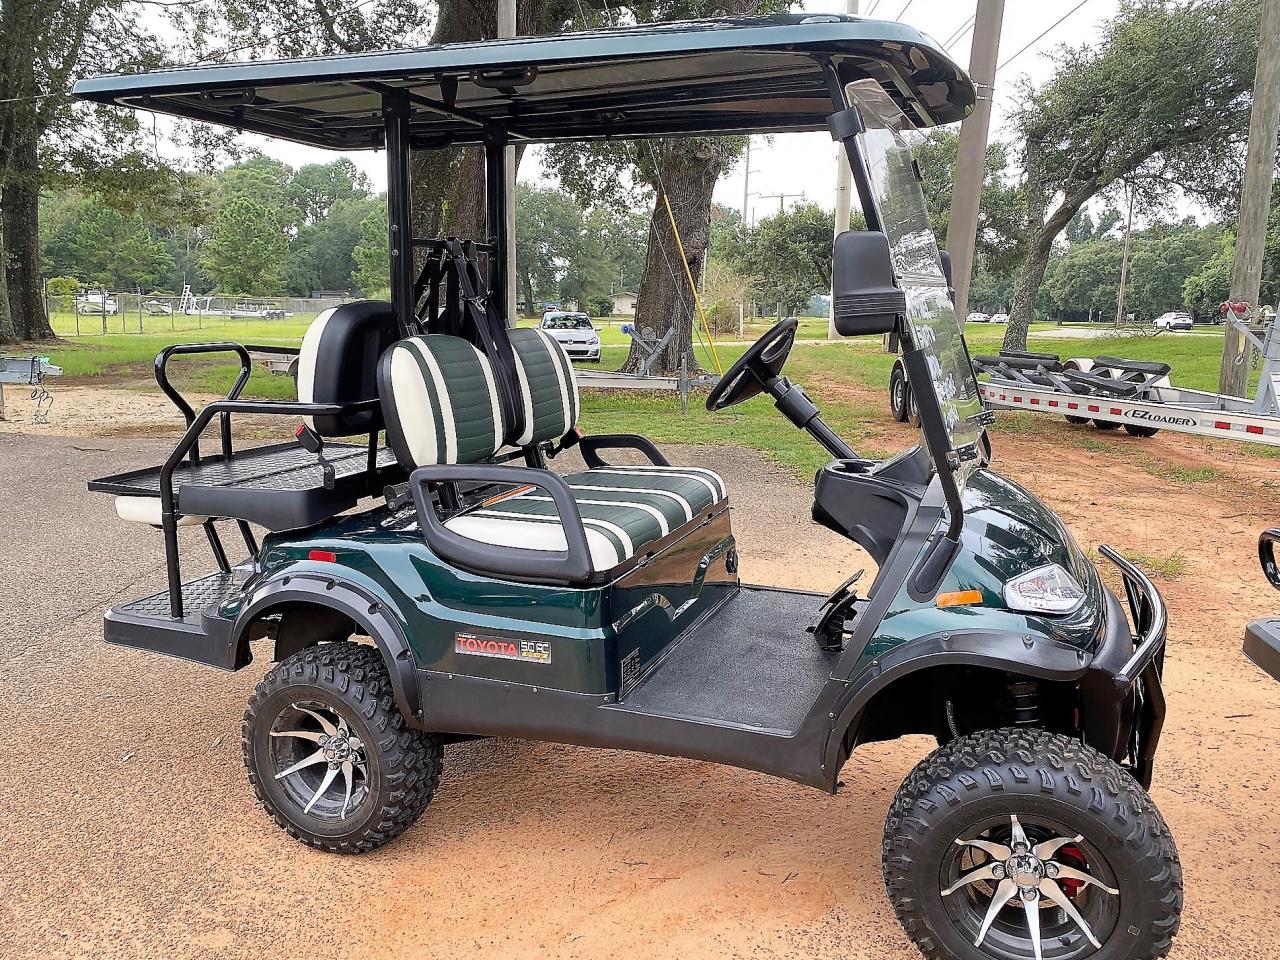 Find Your Dream Ride: Used Golf Carts for Sale by Owner in Lynn, Texas